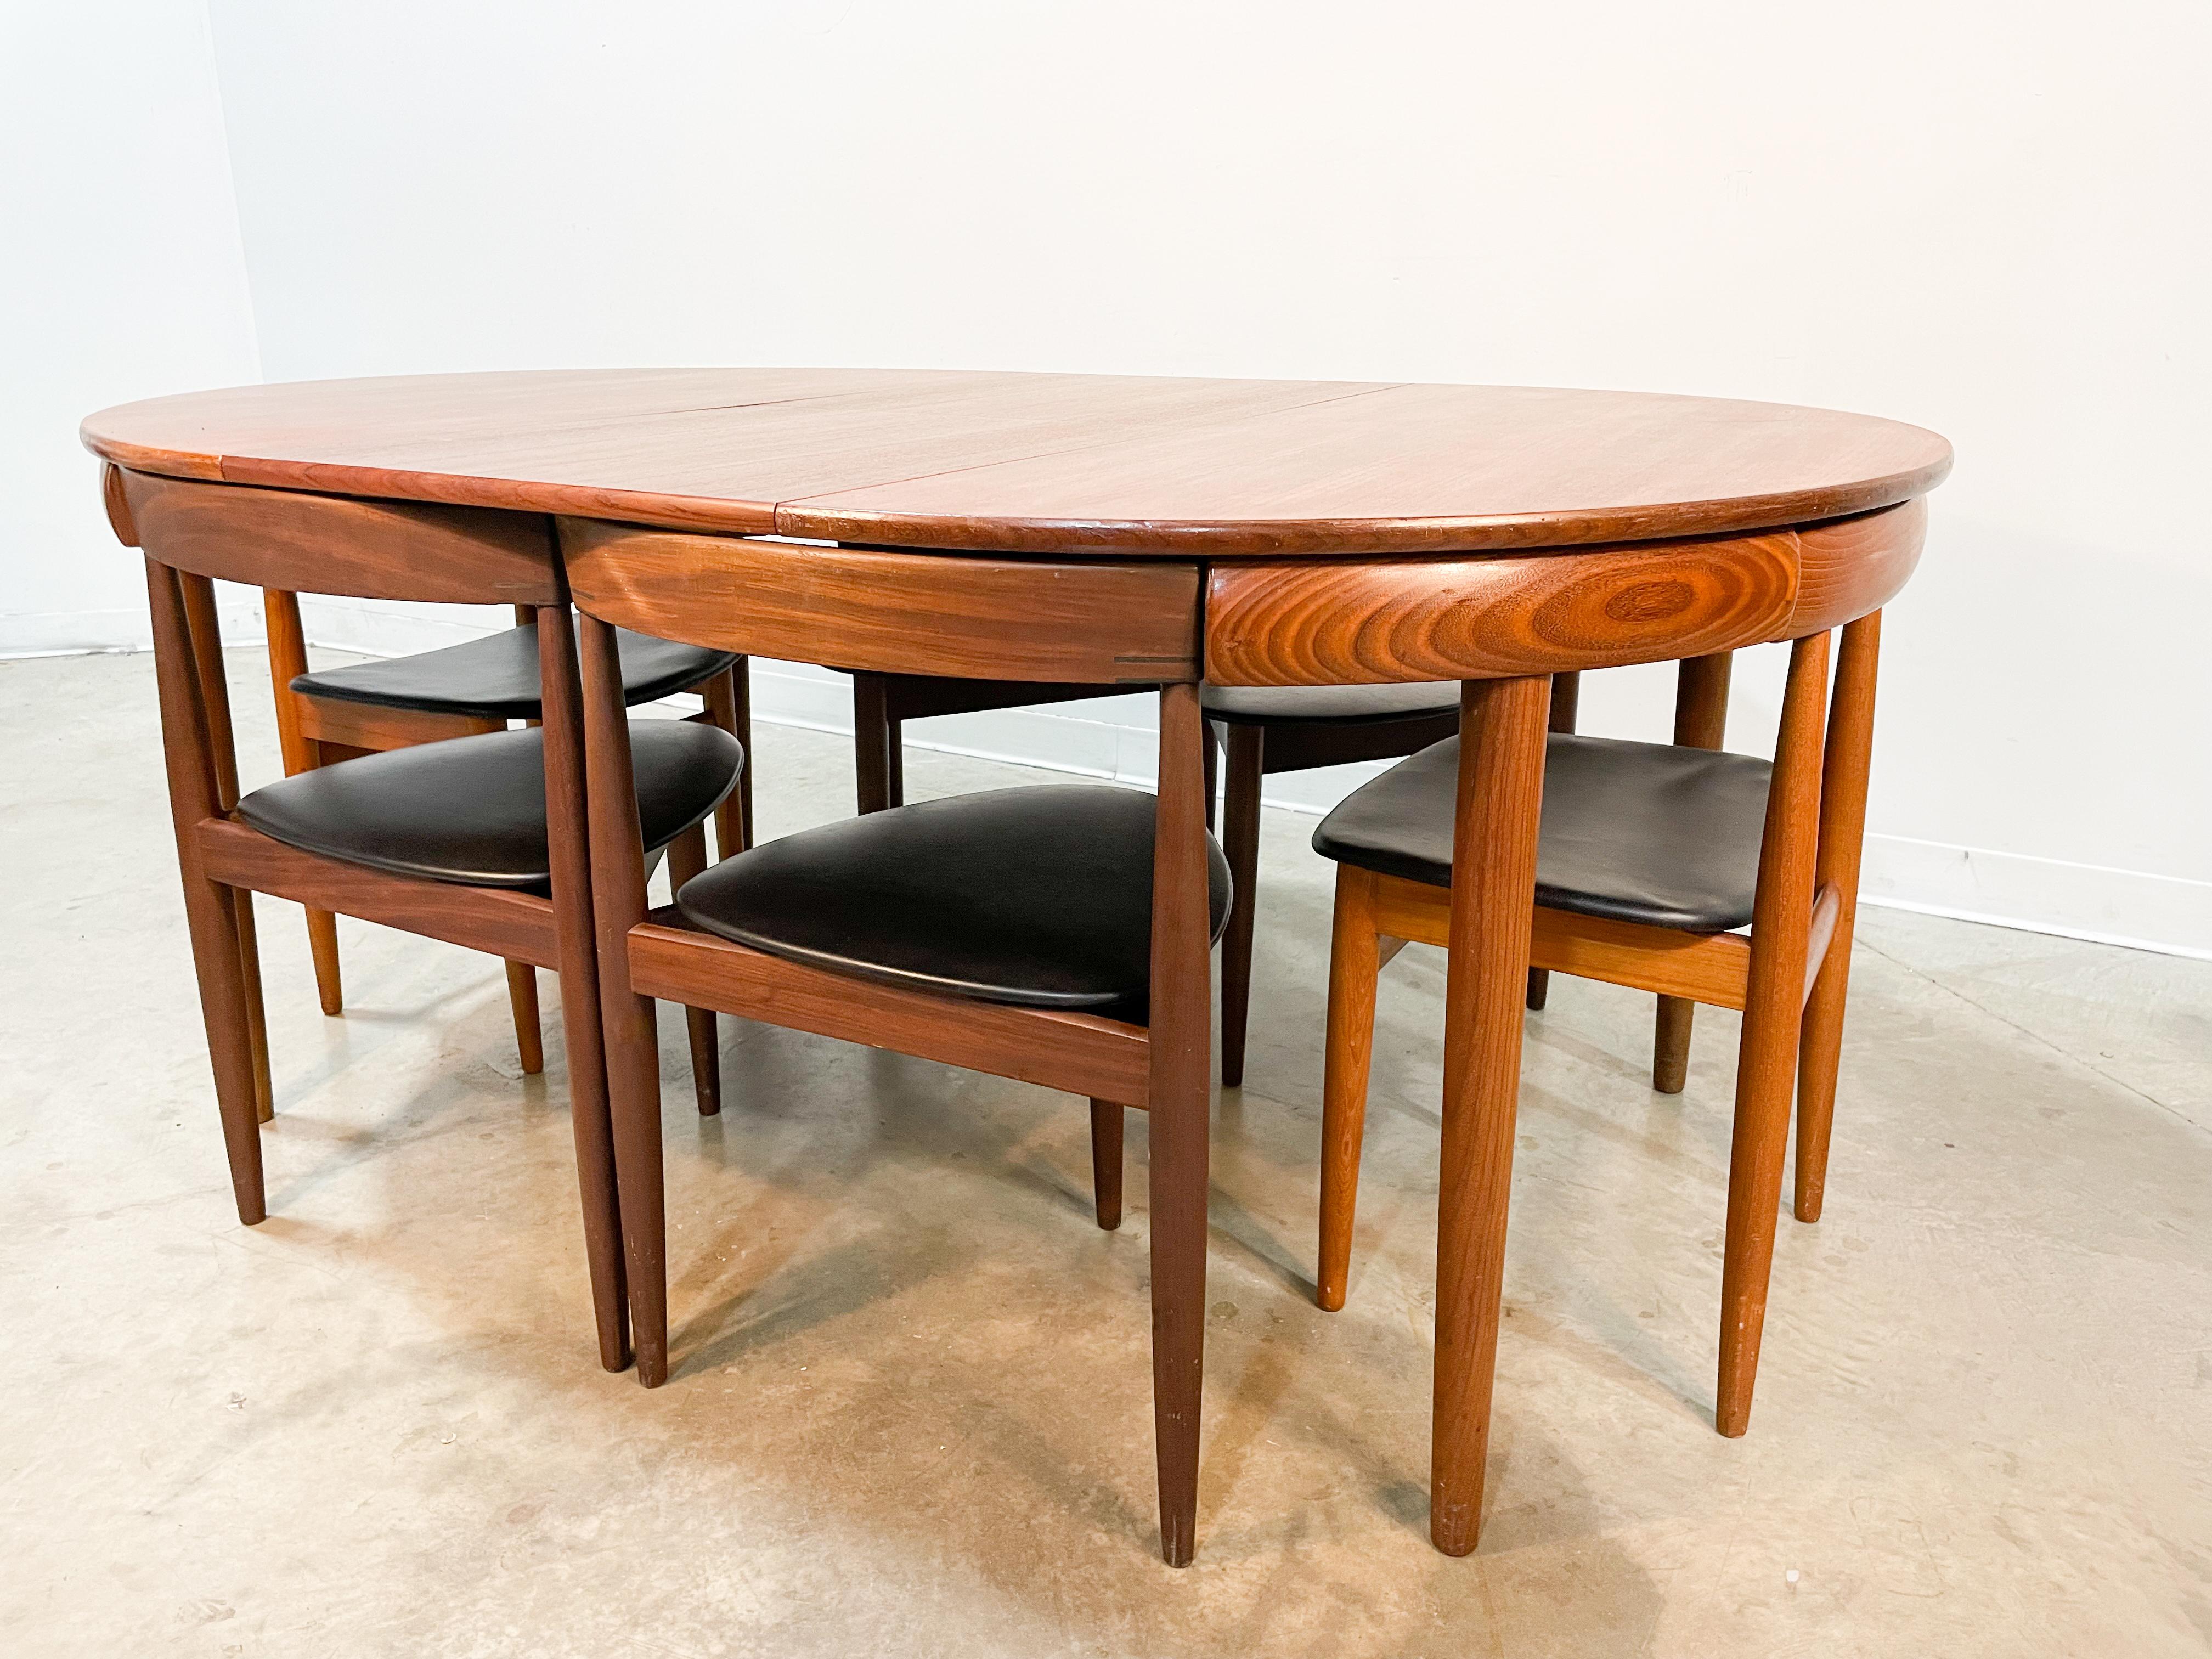 Beautiful Teak expanding dining table designed by Hans Olsen for Frem Røjle.

The table is 42